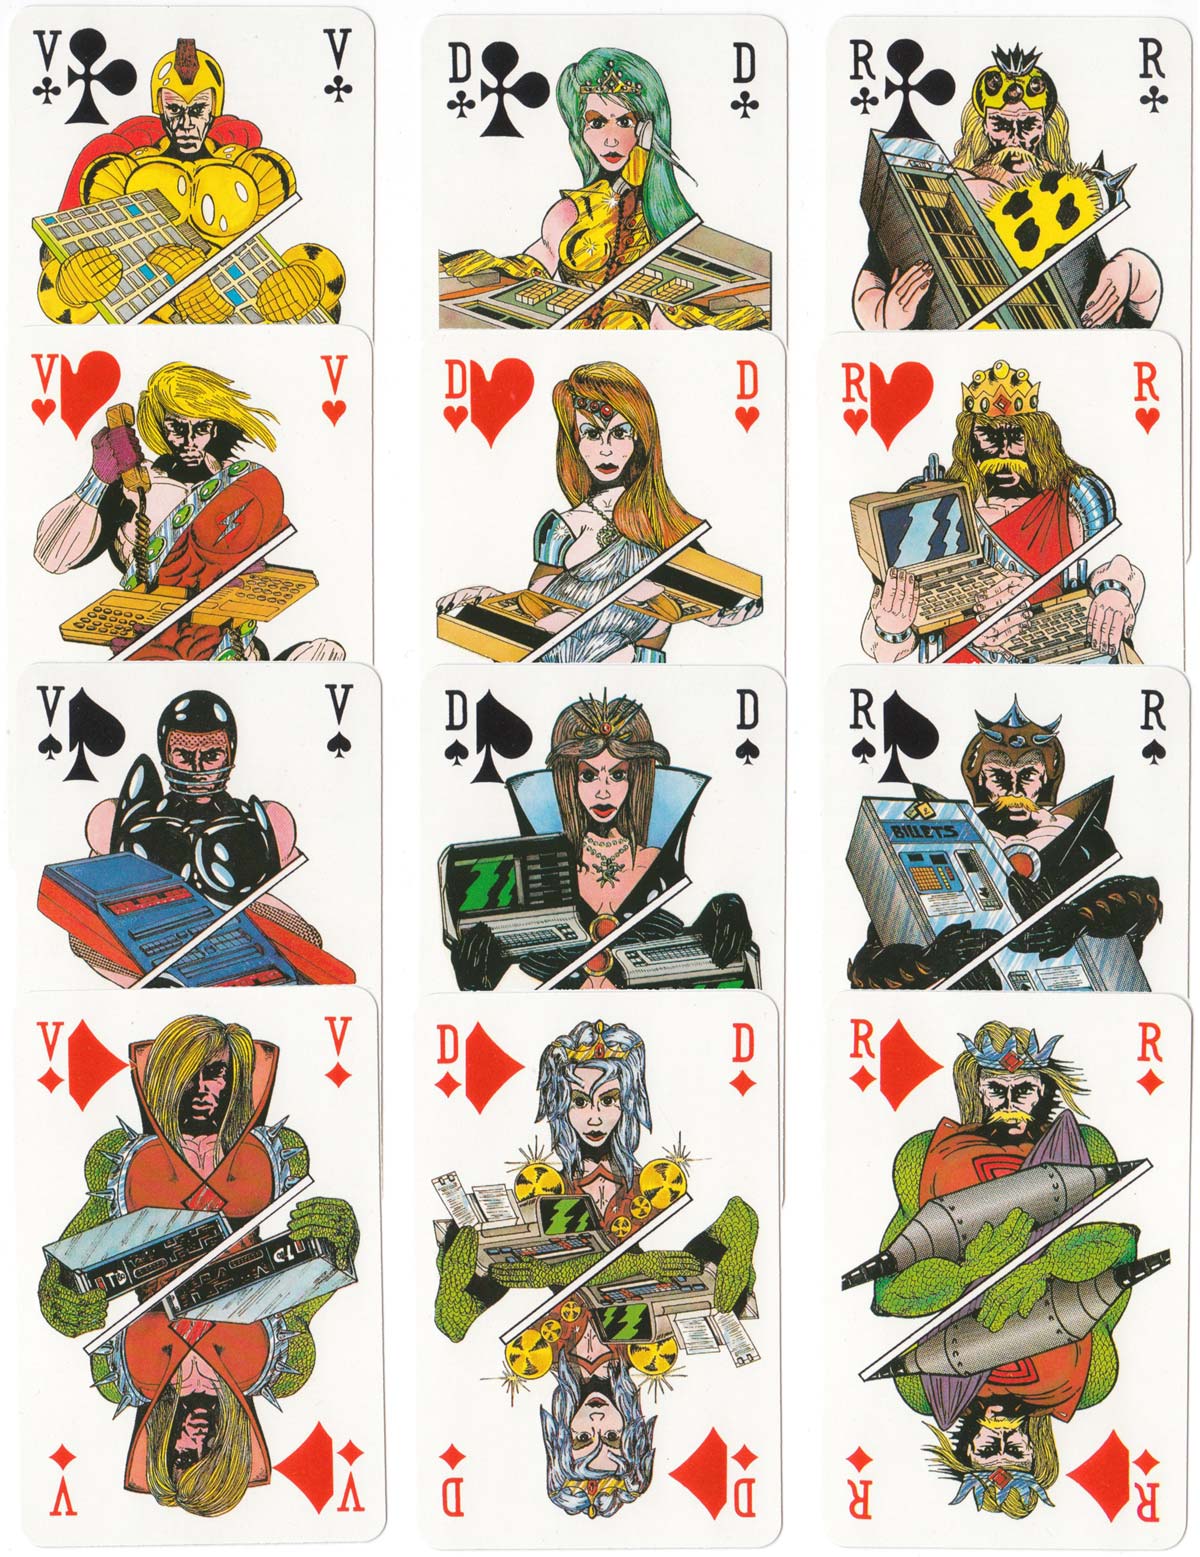 Alcatel playing cards published by Éditions Dusserre, c.1970s